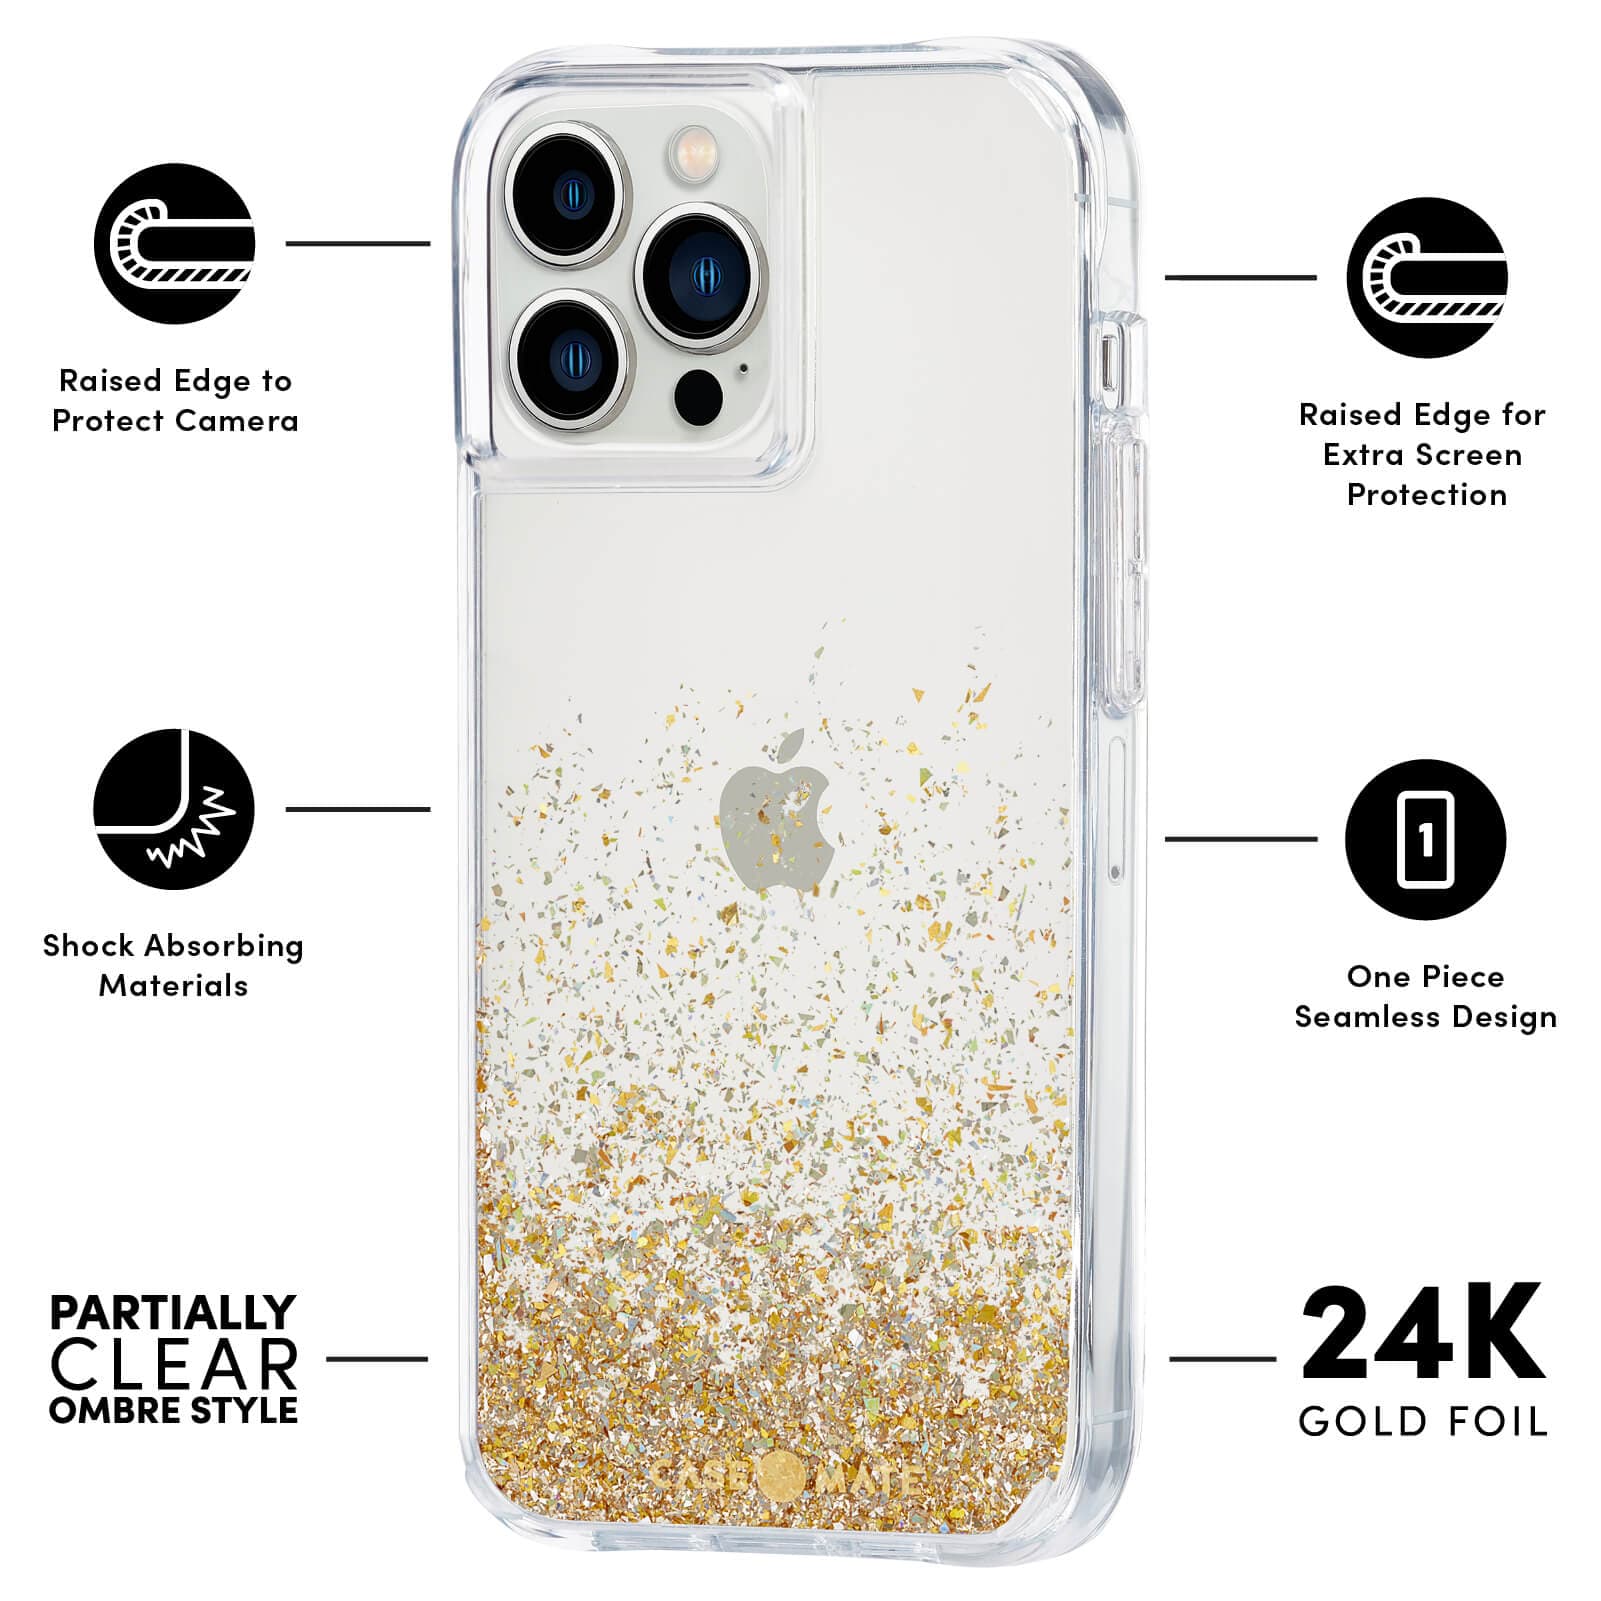 FeatureS: Raised edge to protect camera, shock absorbing materials, partially clear ombre style, raised edge for extra screen protection, one piece seamless design, 24k gold foil. color::Twinkle Gold